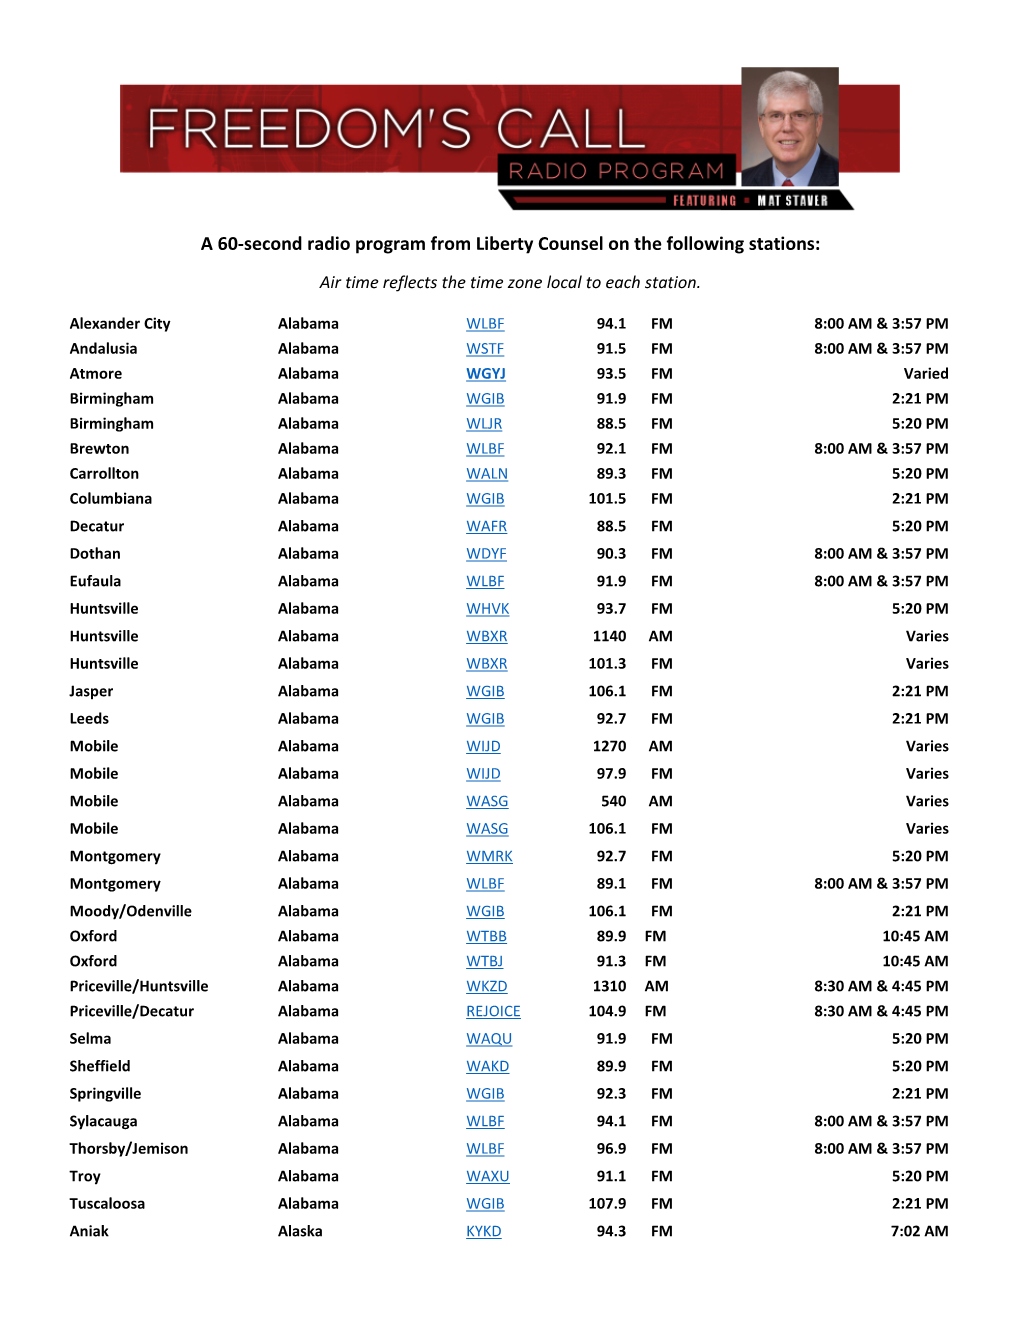 A 60-Second Radio Program from Liberty Counsel on the Following Stations: Air Time Reflects the Time Zone Local to Each Station